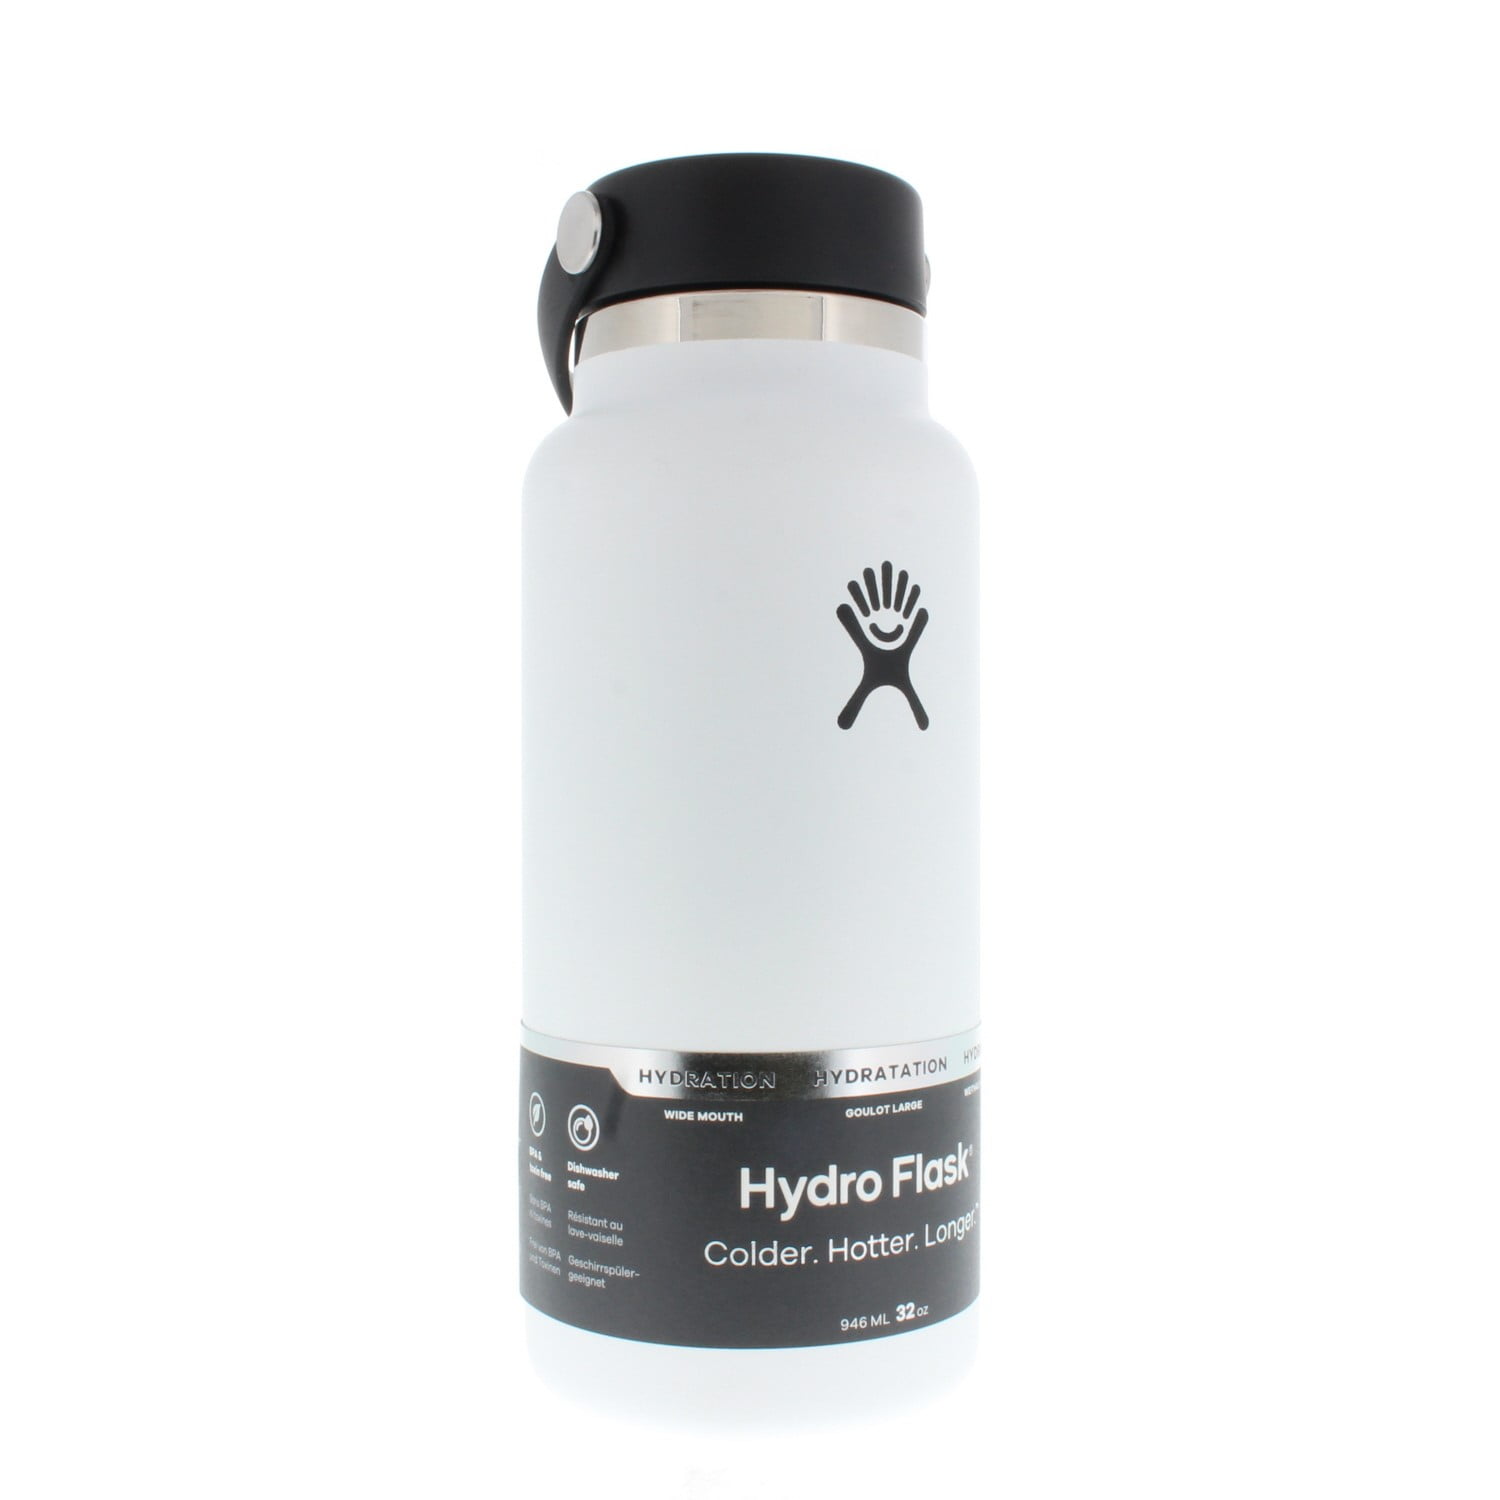 Hydro Flask 32-Ounce Wide Mouth Water Bottle with Flex Chug Cap